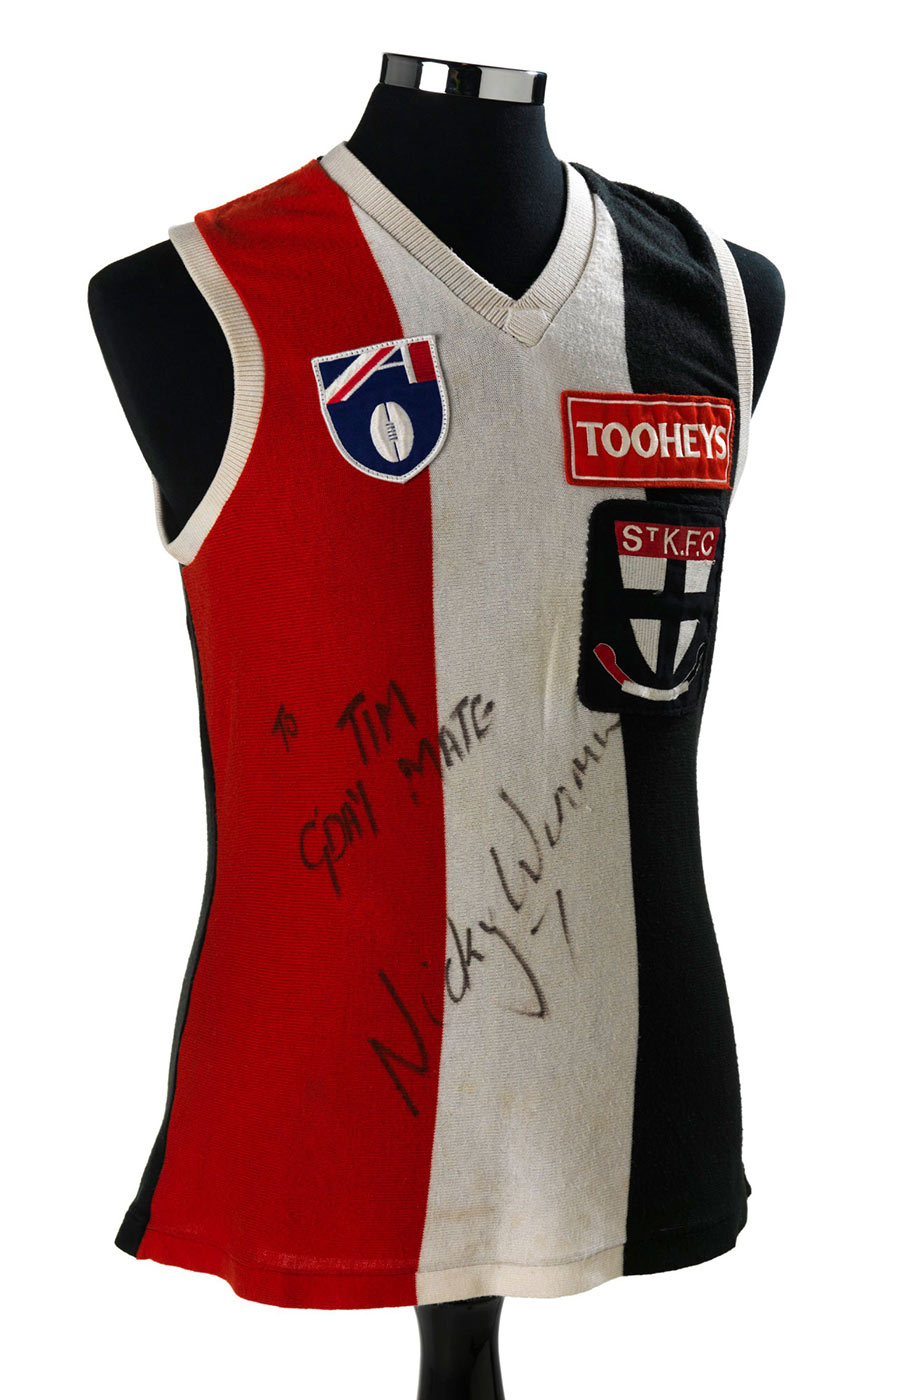 Sleeveless top with vertical red, white and black stripes. There is a St Kilda logo on the breast with the word ‘Tooheys’ above that. The words ‘Tim G’day Mate’ is written in texta and signed by Nicky Winmar.